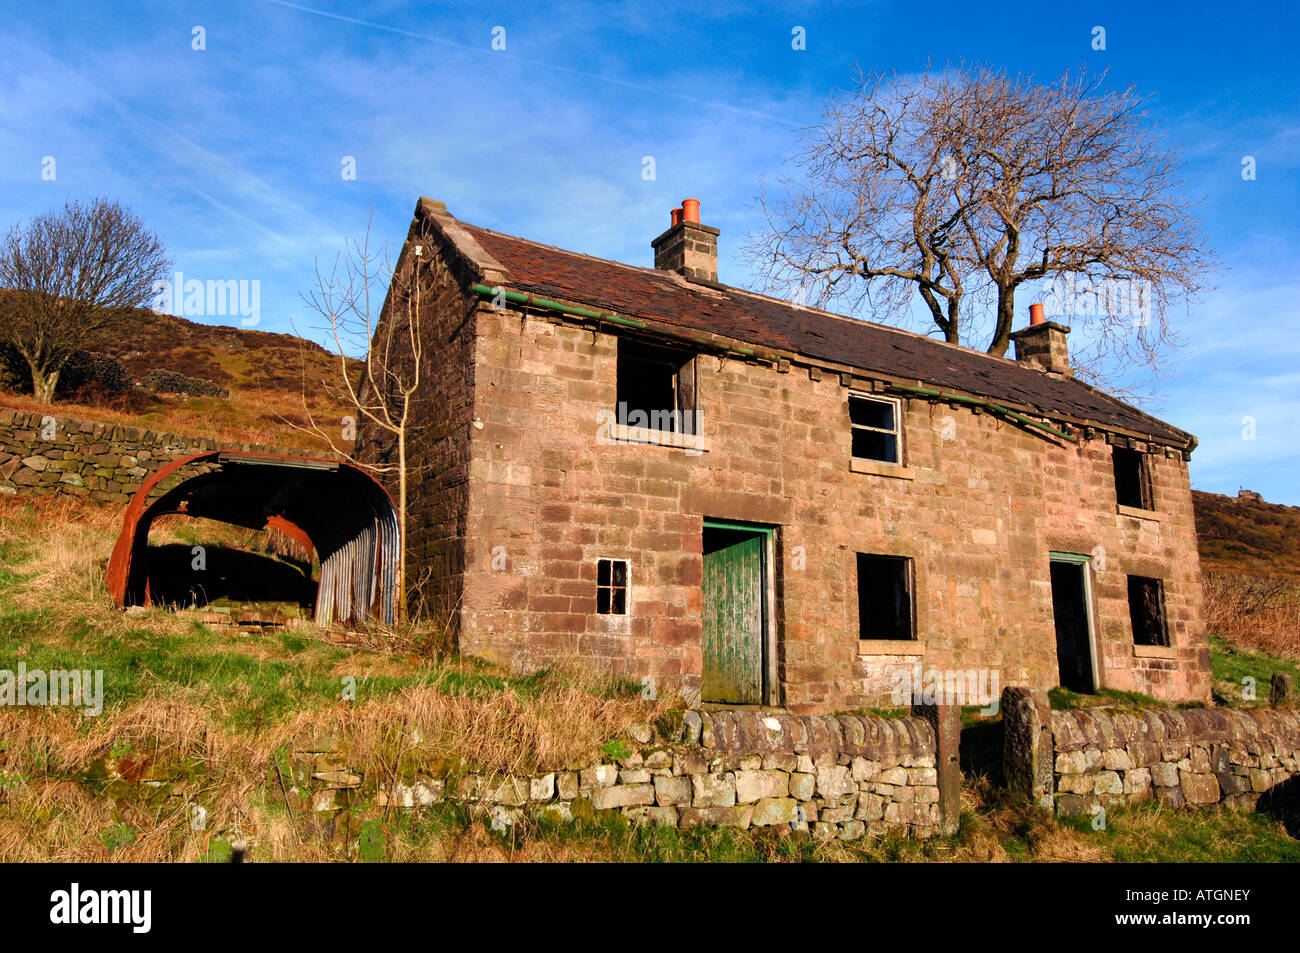 Two Derelict  Semi Detatched Stone Cottages.Located On The Staffordshire Moorlands In England. Stock Photo